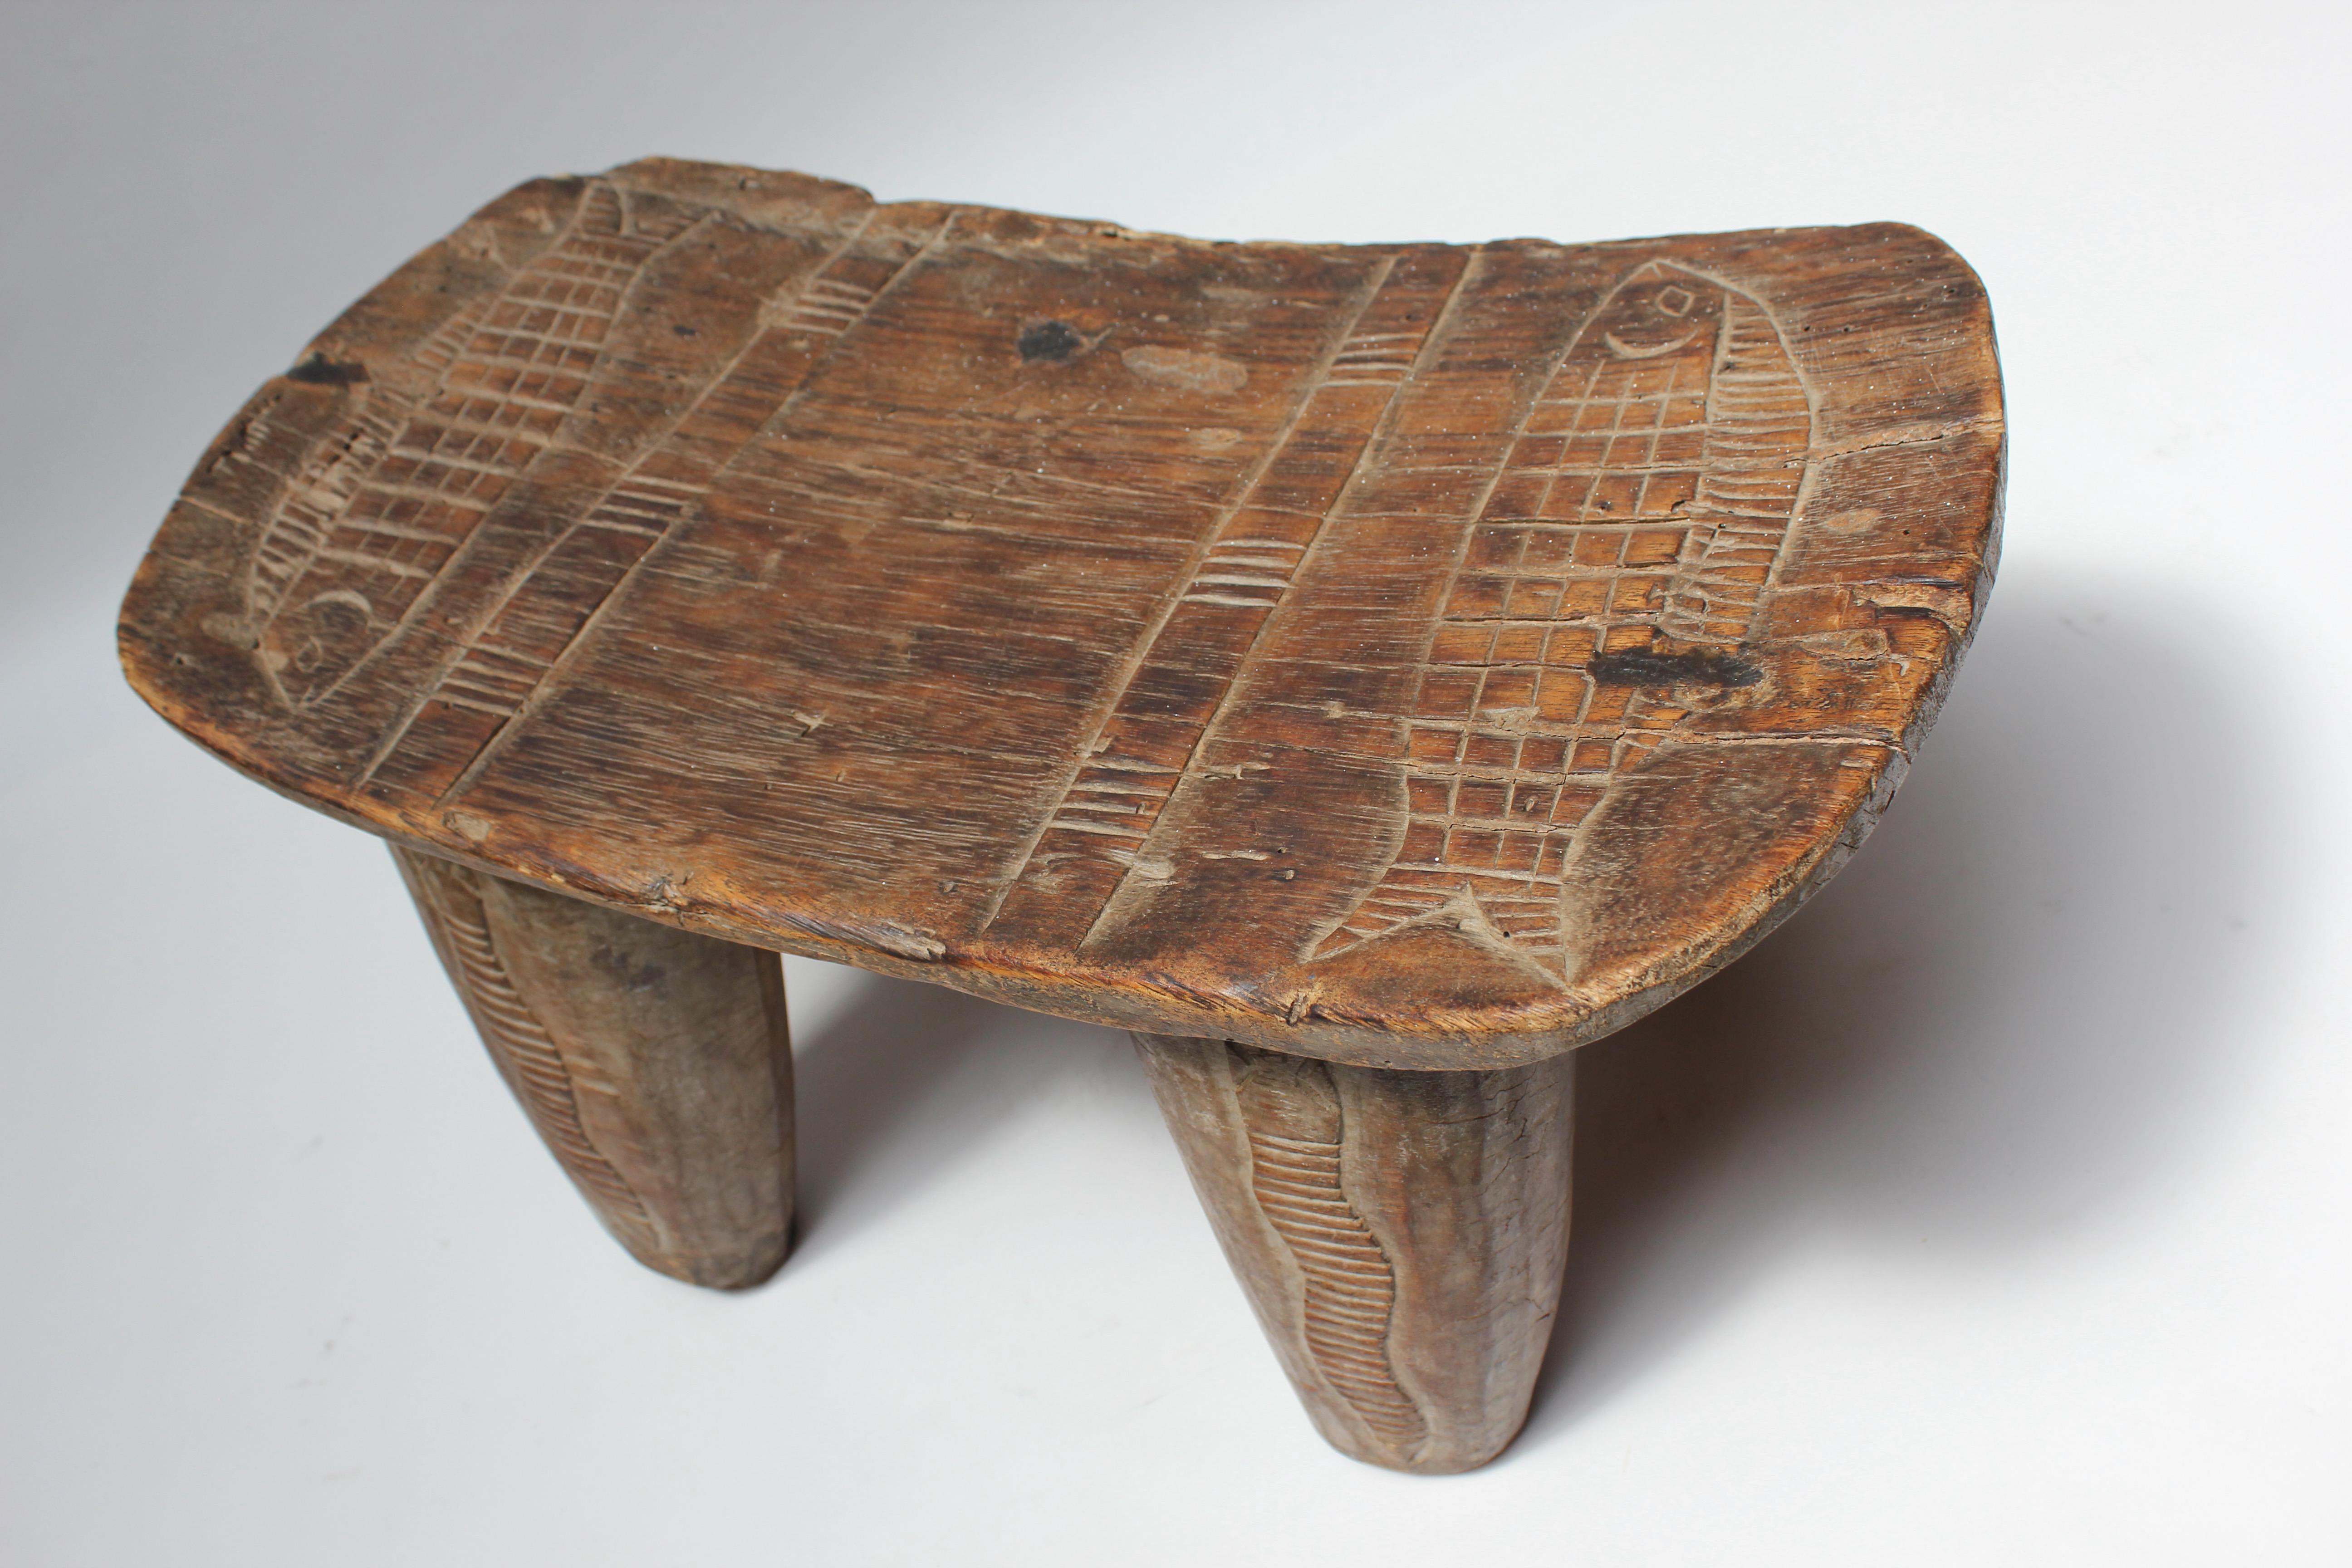 Senufo stool supported by thick, sculptural legs (Ivory Coast, Africa, ca. 1950). Carved snake and fish details present with nice patina / wear consistent with age along with gouges and spots of wood loss, as shown. 
H: 11